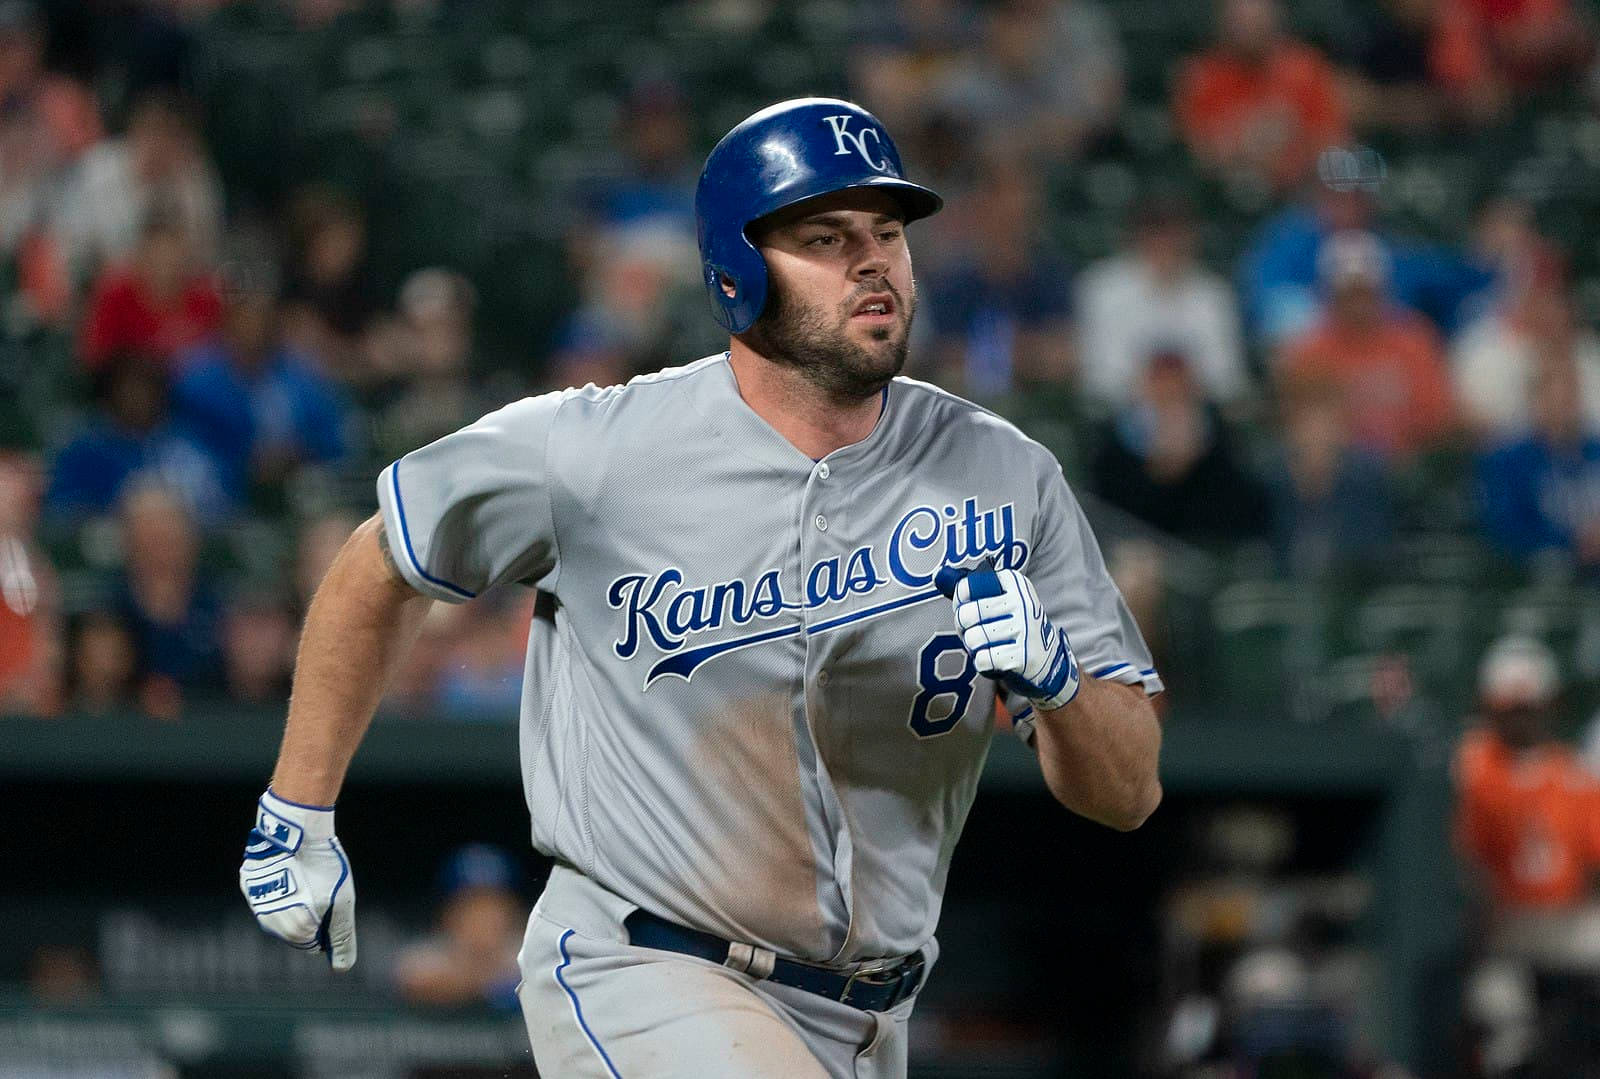 Joggingmike Moustakas Is Not A Complete Sentence. Could You Please Provide A Complete Sentence Or Clarify What You Are Looking For So I Can Assist You Better? Fondo de pantalla